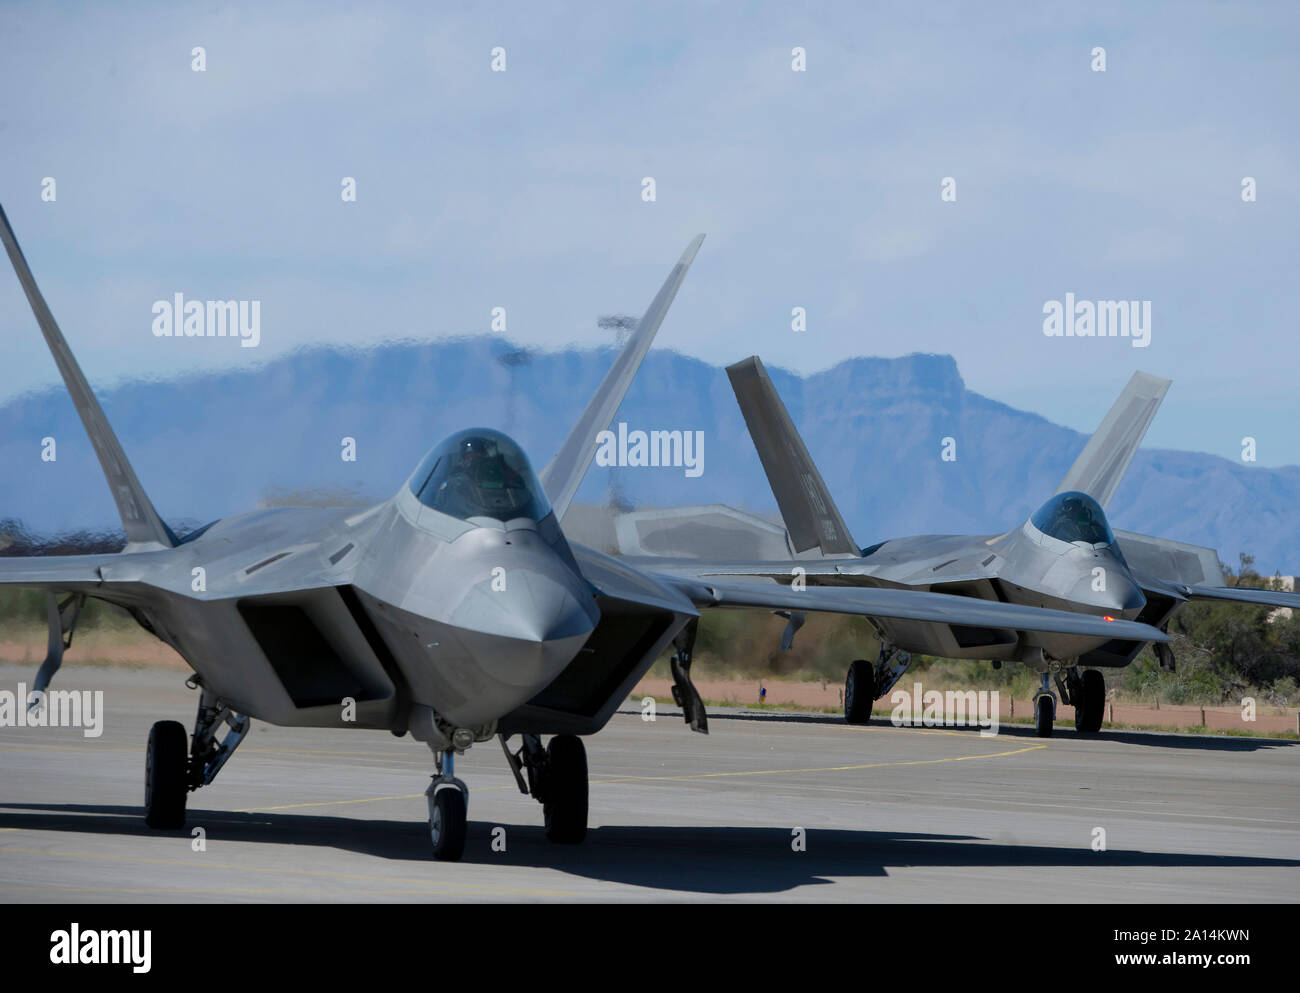 A pair of F-22 Raptors taxiing on the runway. Stock Photo